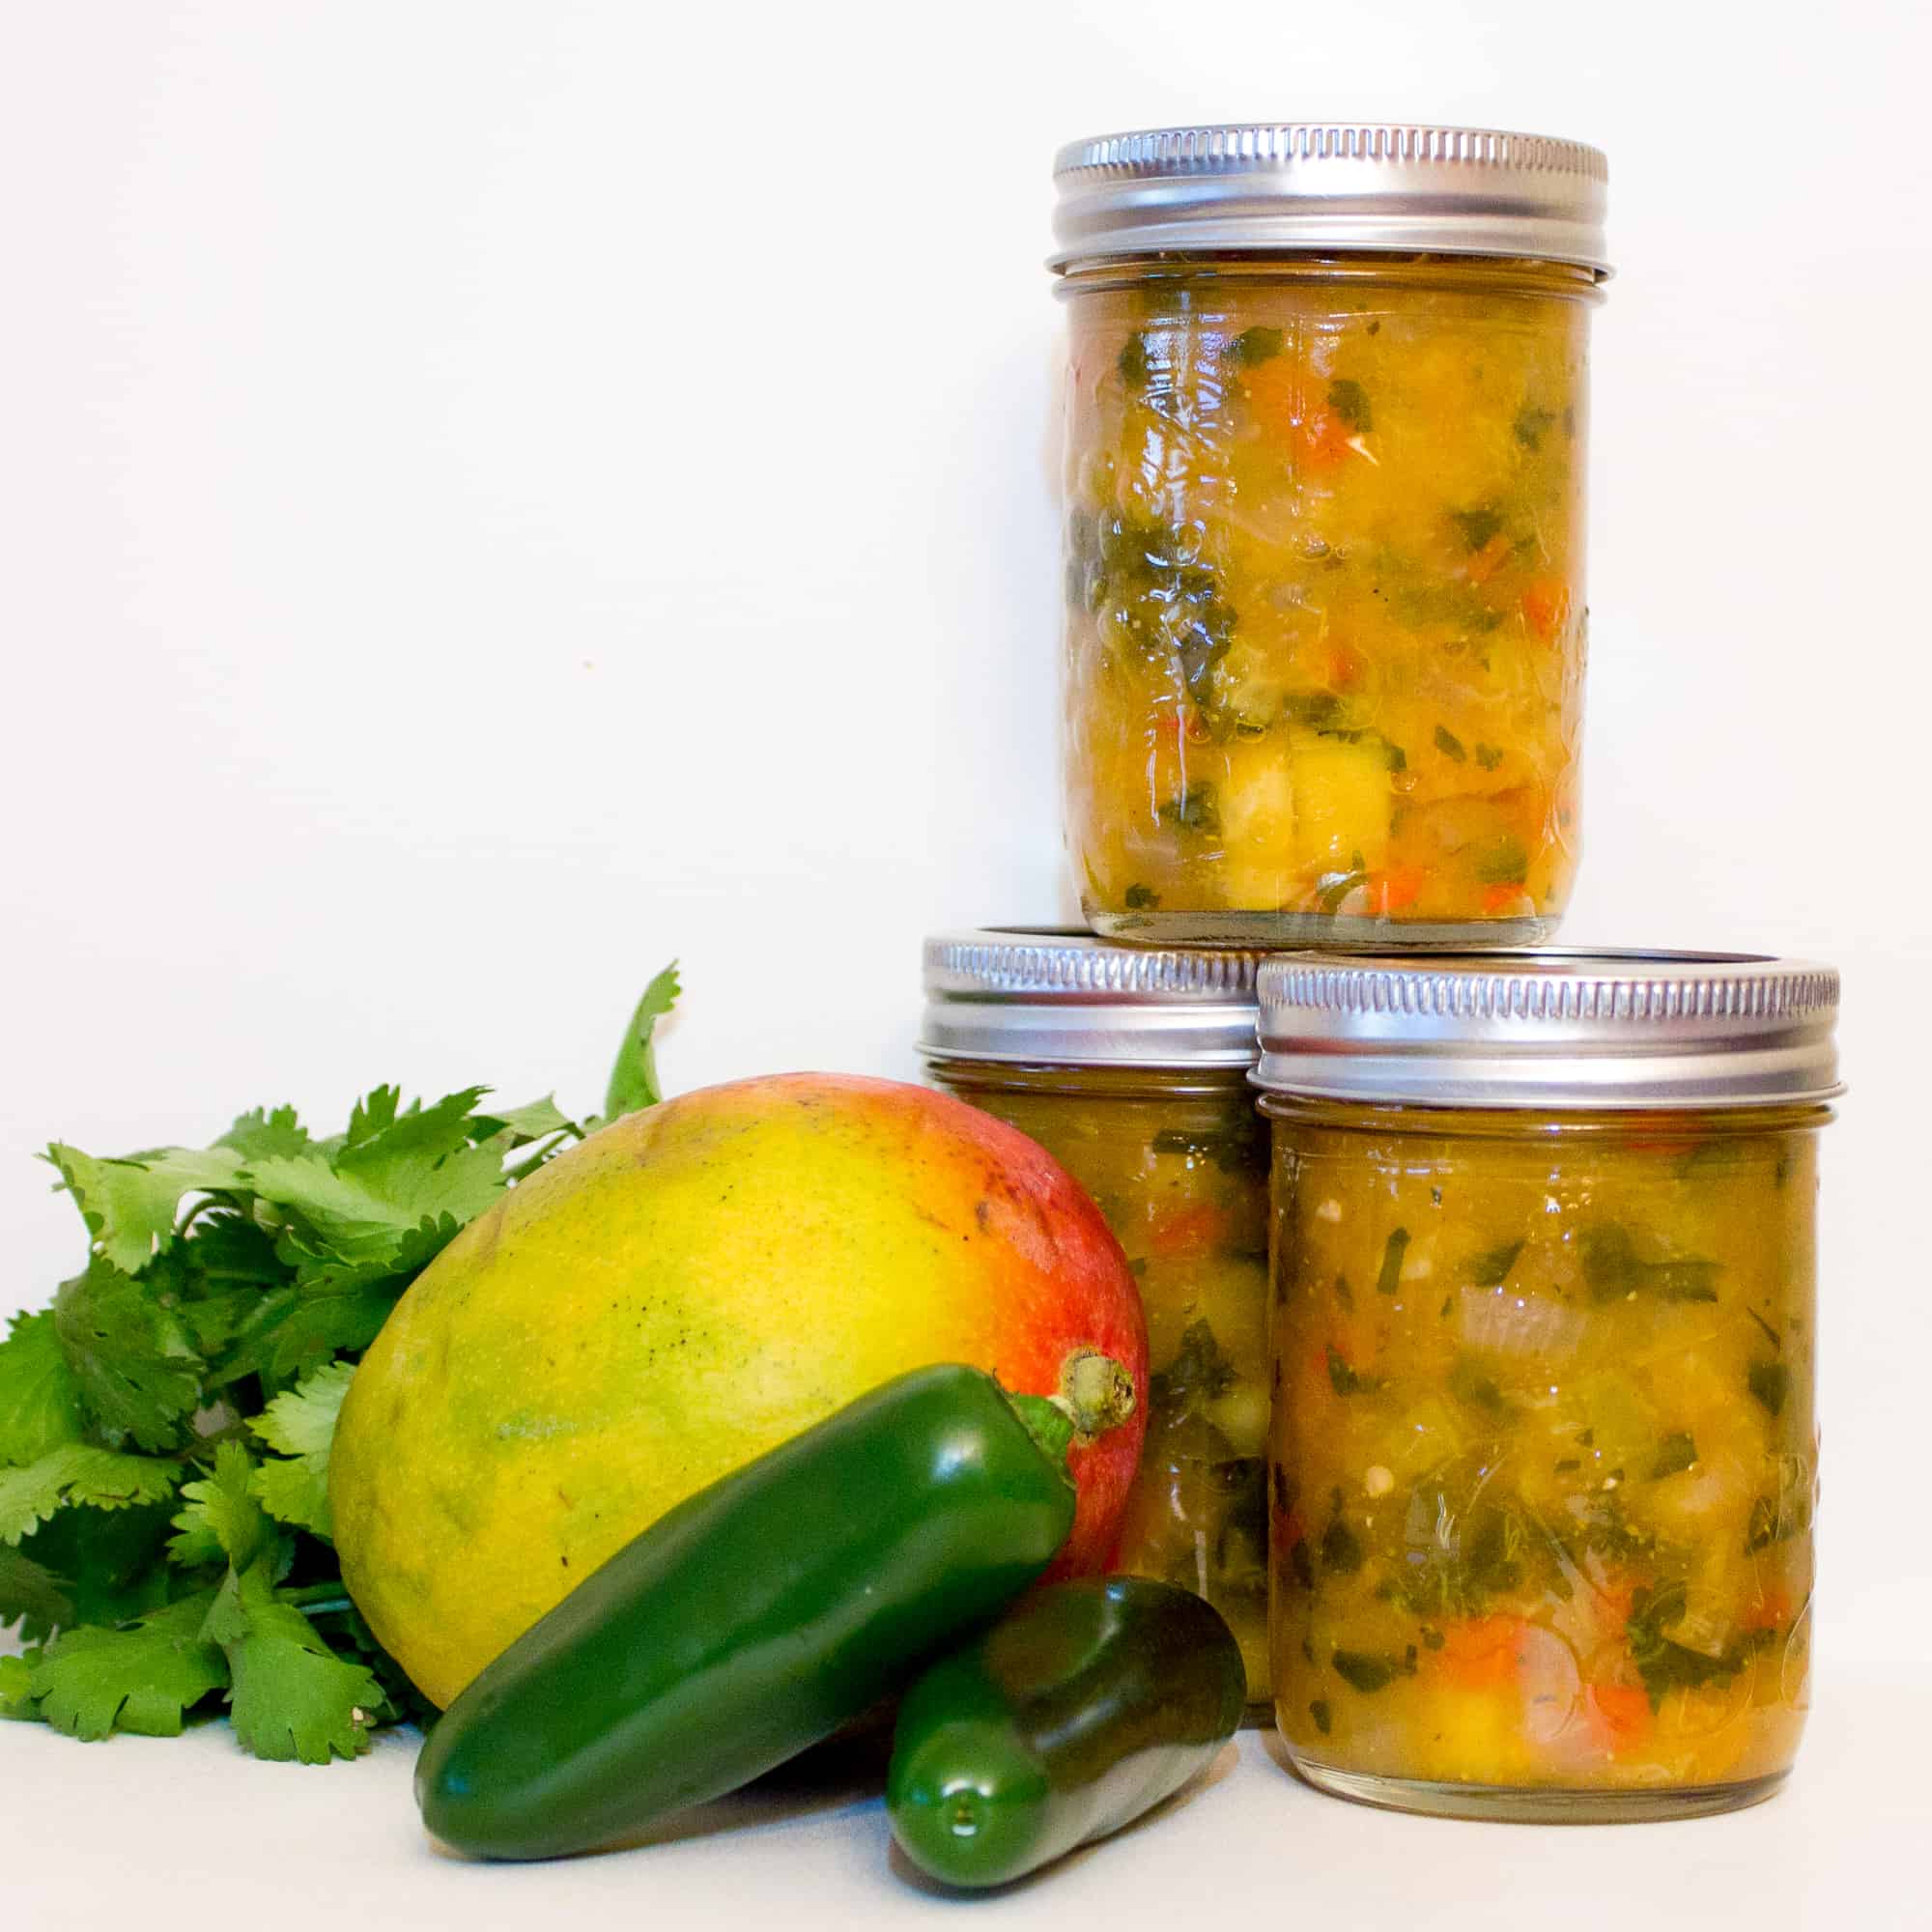 A fresh fruity salsa with a Mexican kick of cumin and jalapeno peppers. This bright peach and mango salsa goes great with nacho chips.